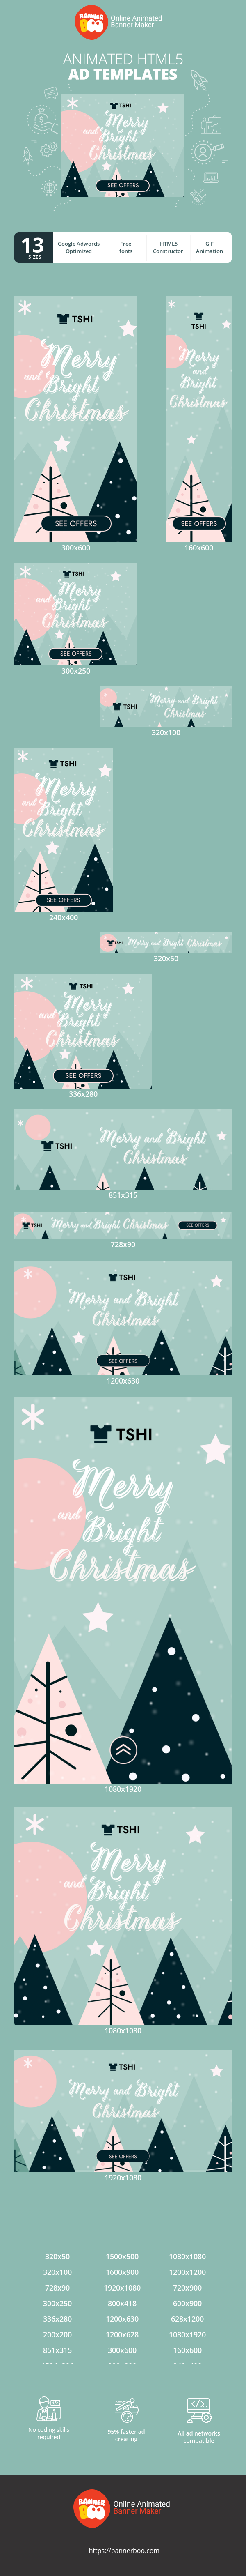 Banner ad template — Merry And Bright Christmas — Christmas